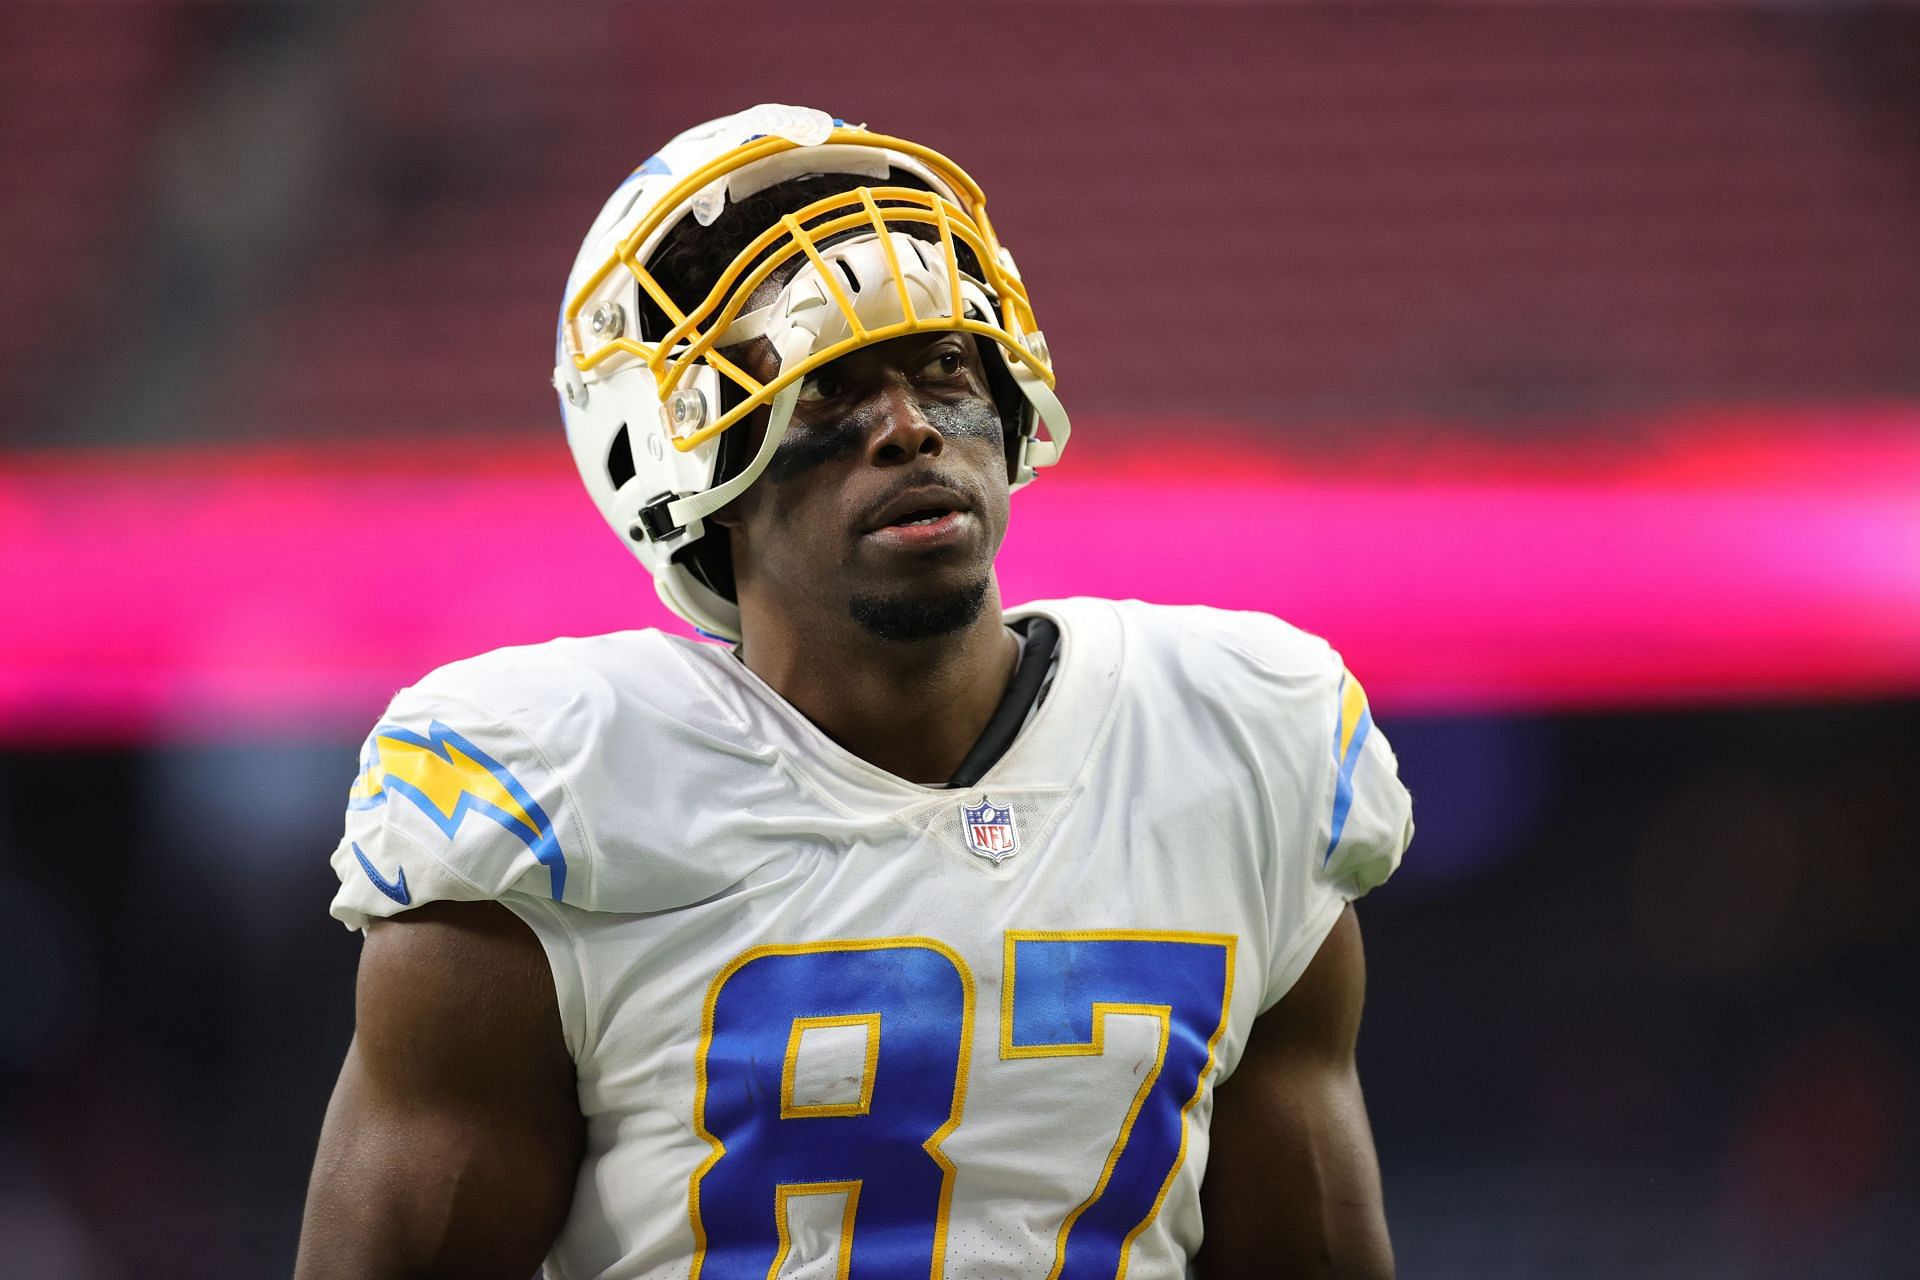 Los Angeles Chargers tight end Jared Cook